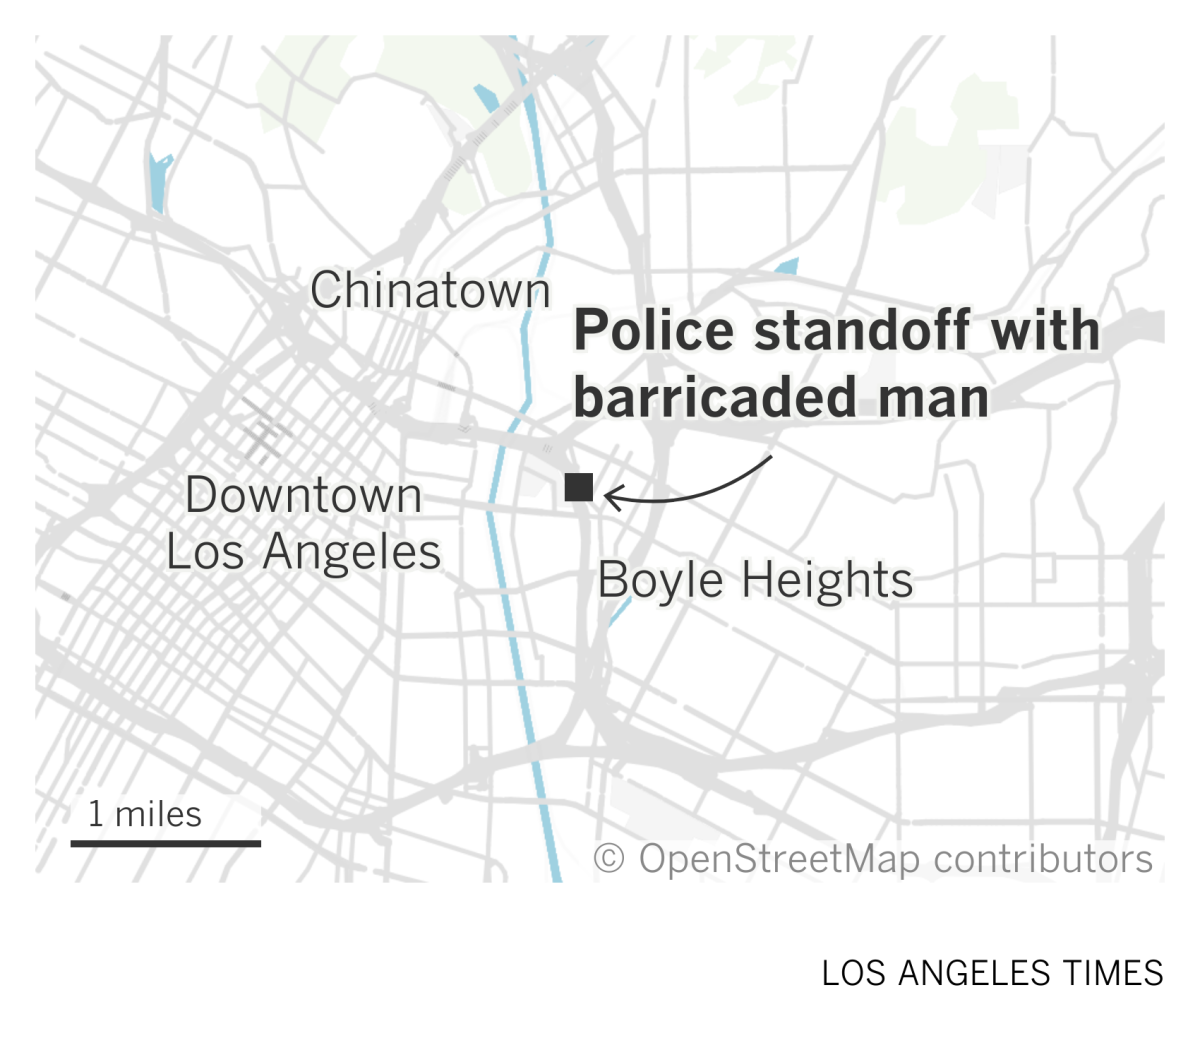 A map of Los Angeles' Eastside showing where police were in a standoff with a barricaded man in Boyle Heights